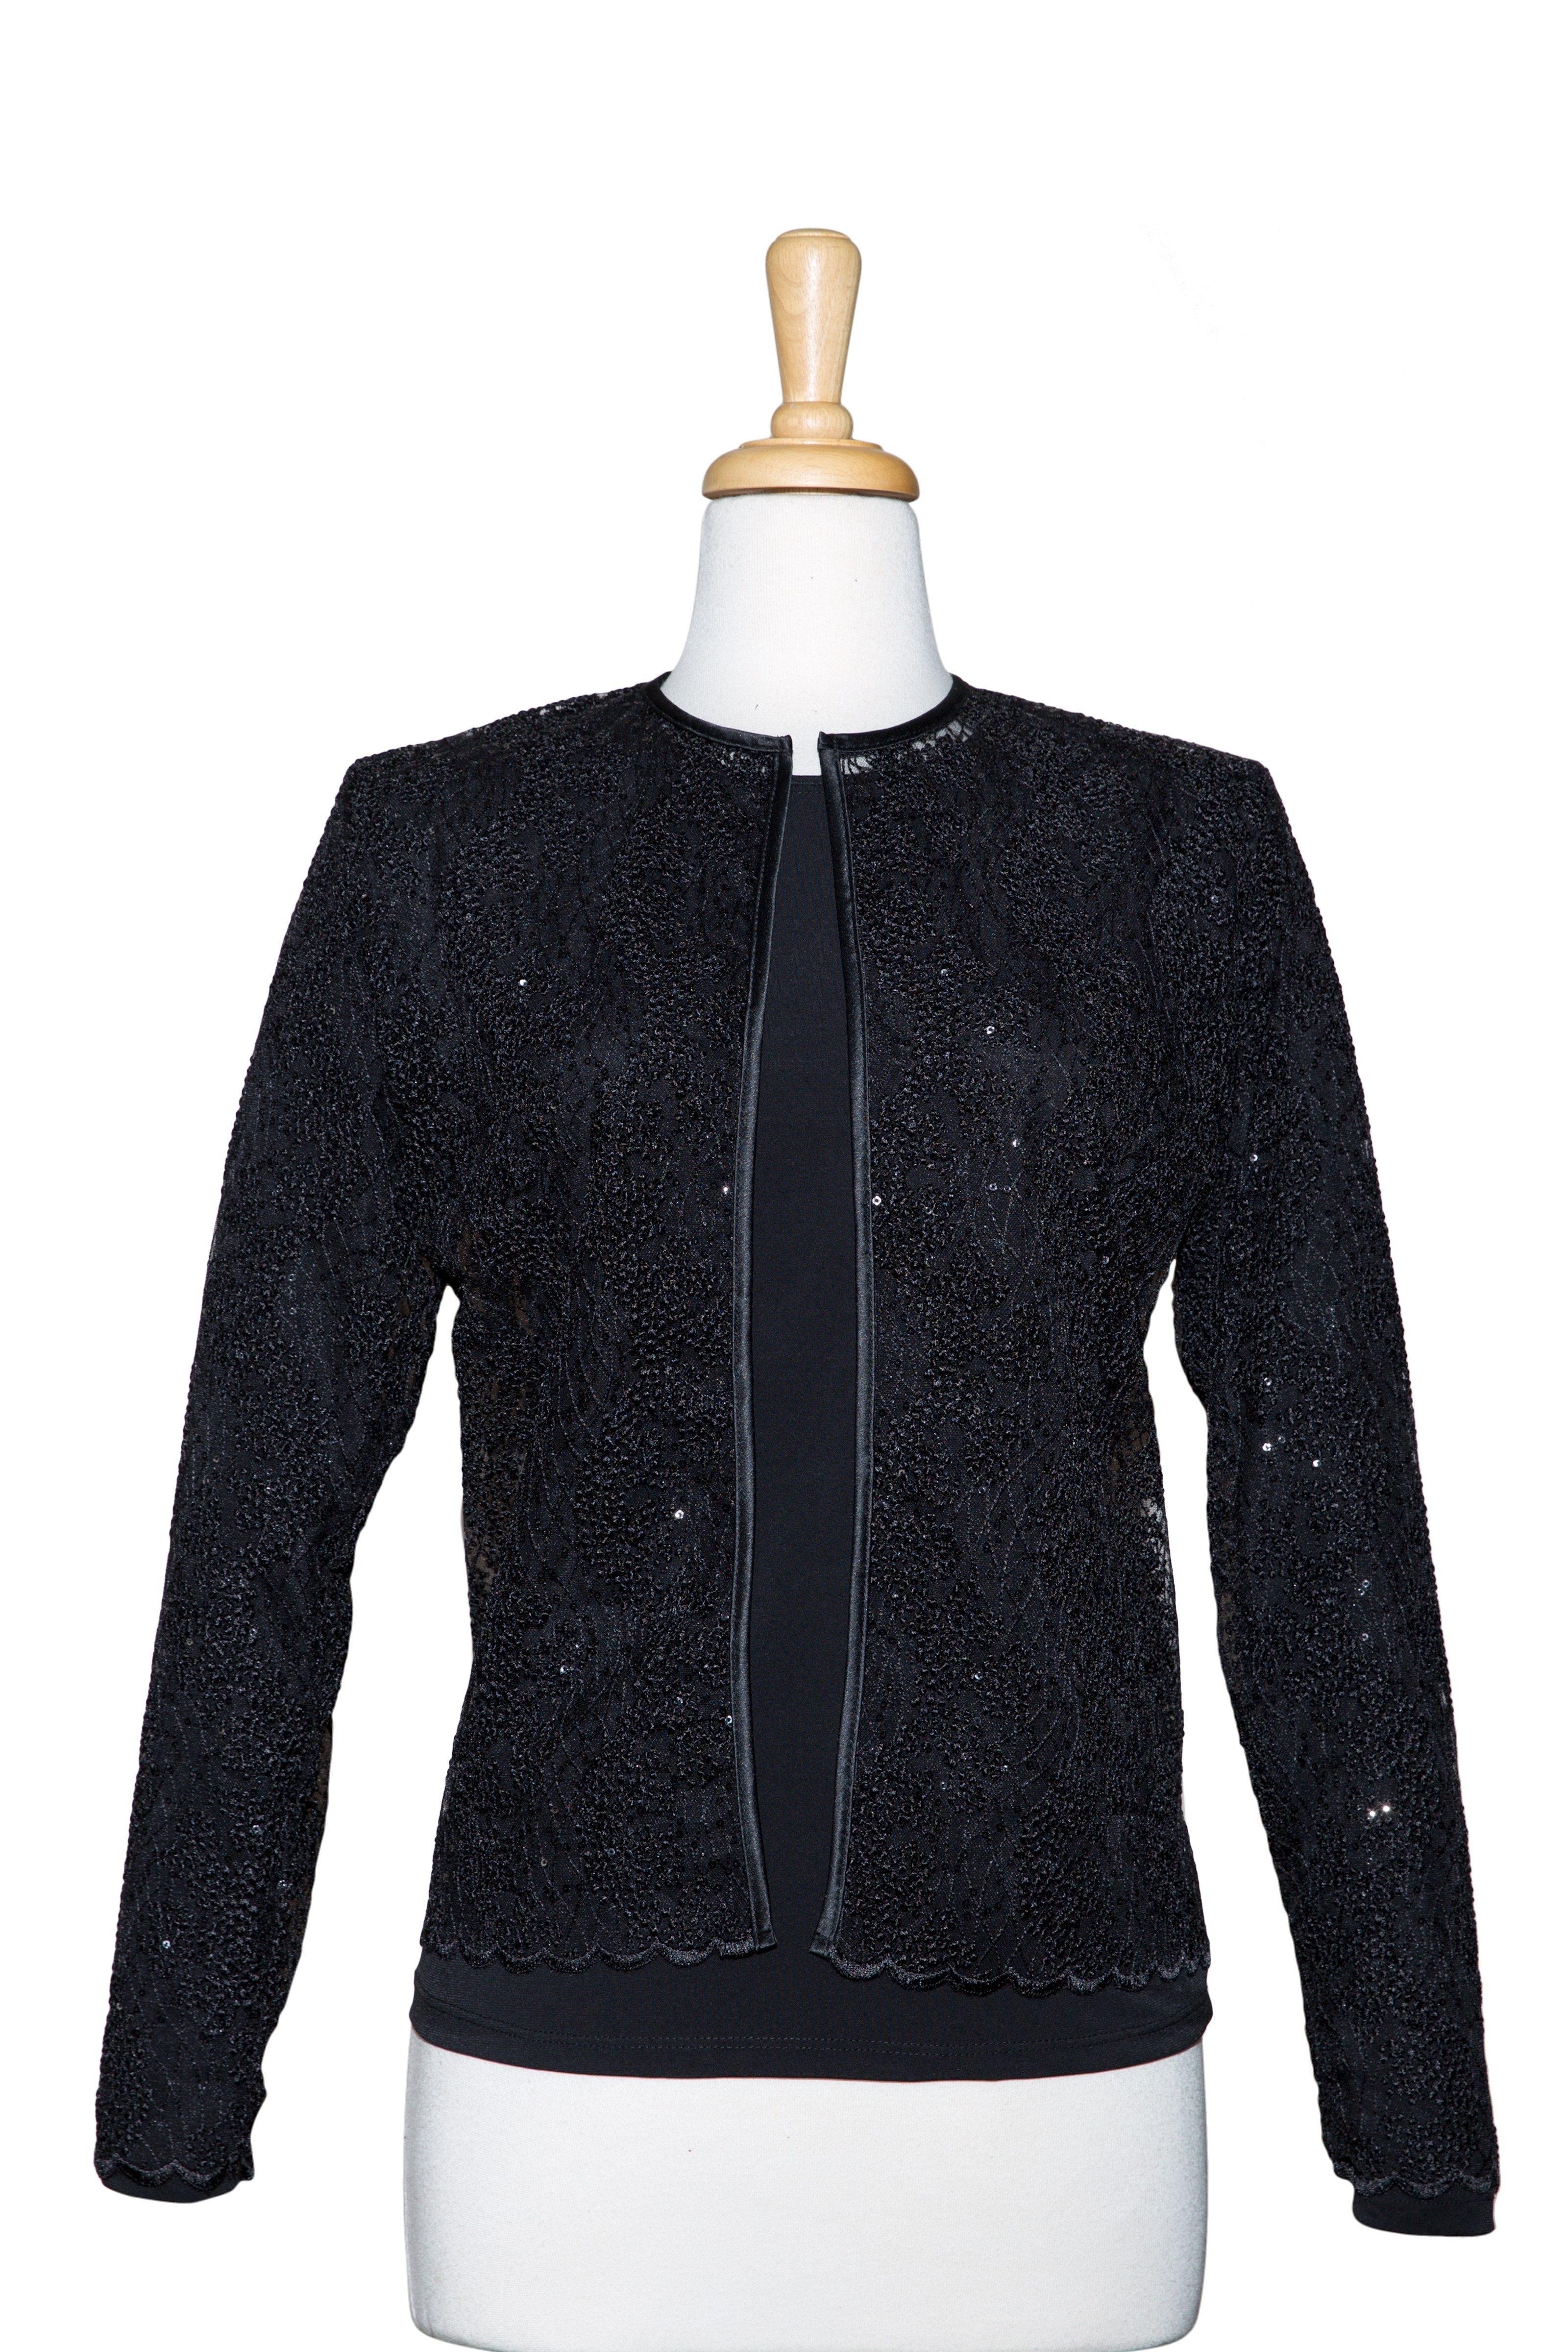 Two Piece Black Embroidered Sequins Lace With Black Long Sleeve Top